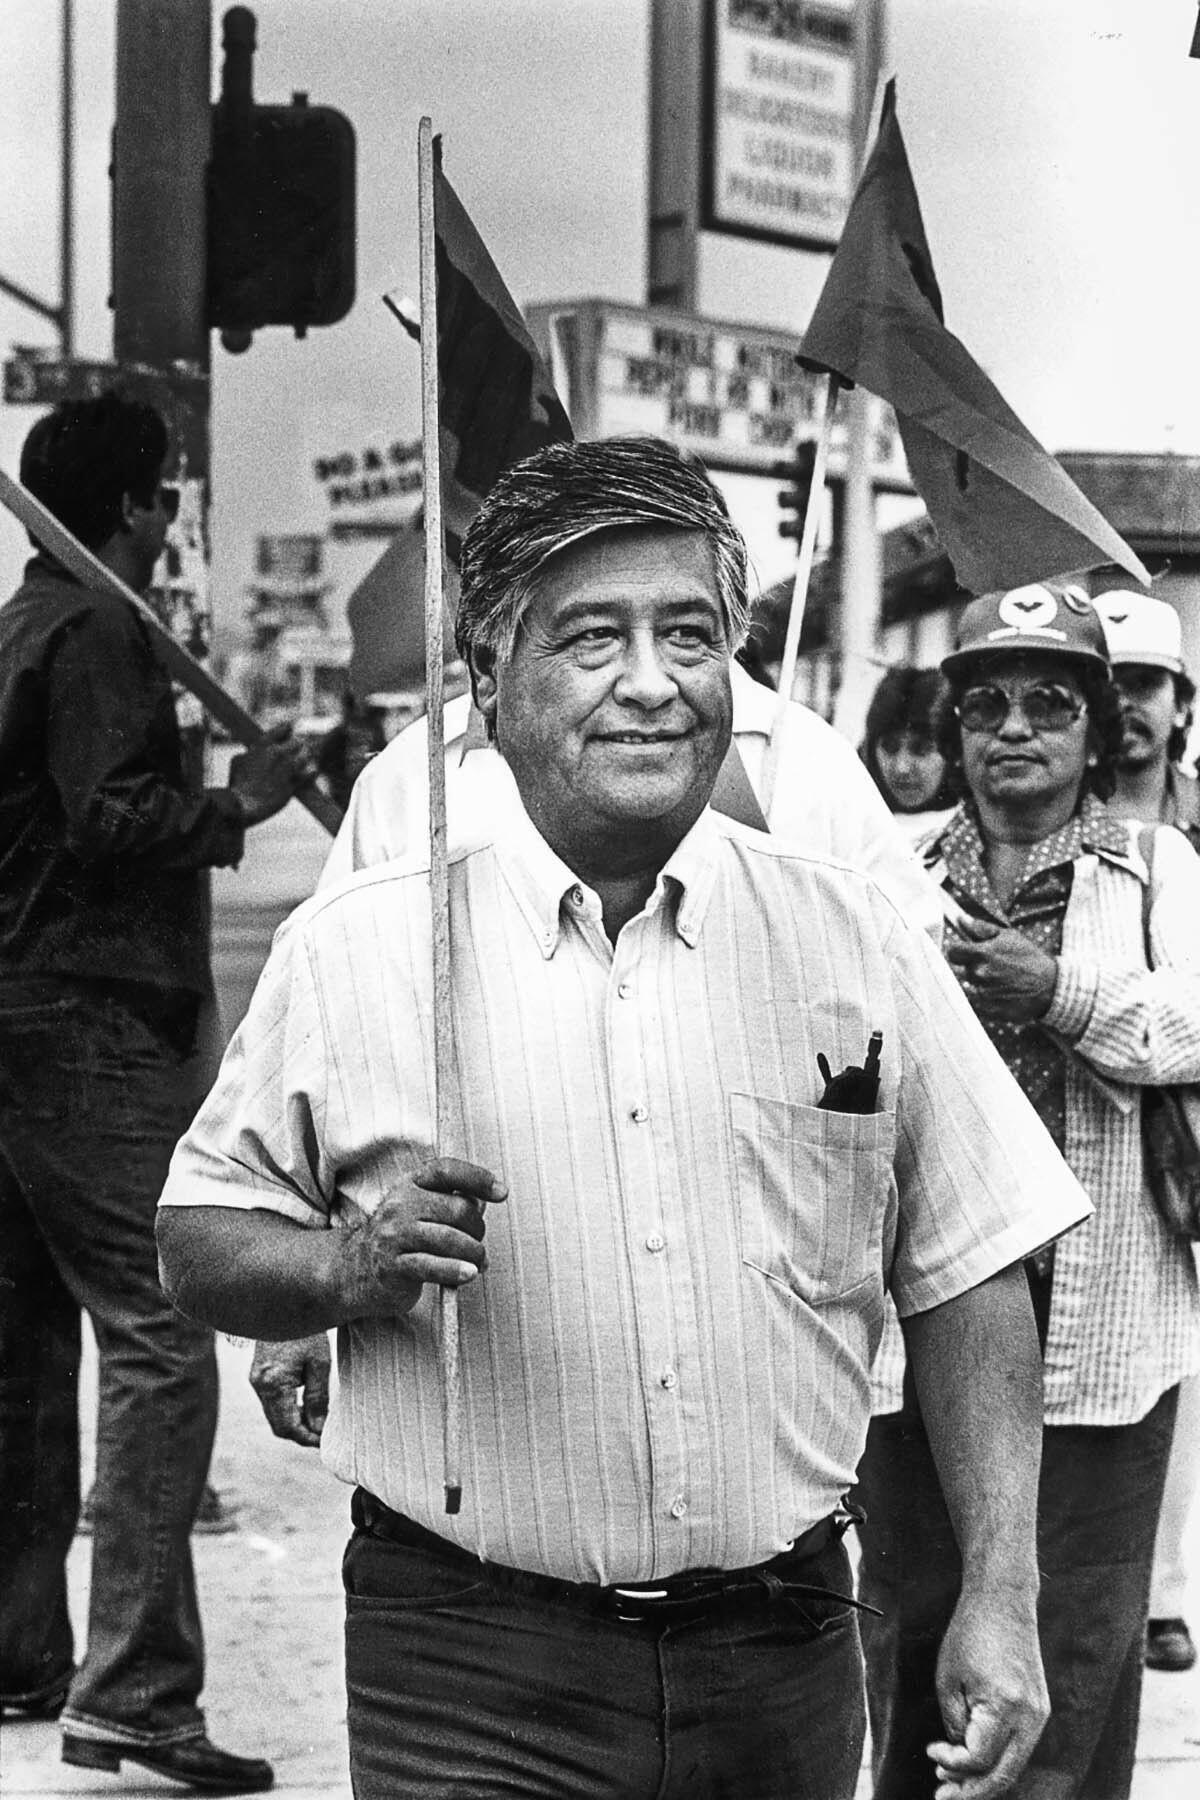 June 24, 1985: Chavez leads a march during a grape boycott rally near a supermarket at 3rd Street and Vermont Avenue in Los Angeles.